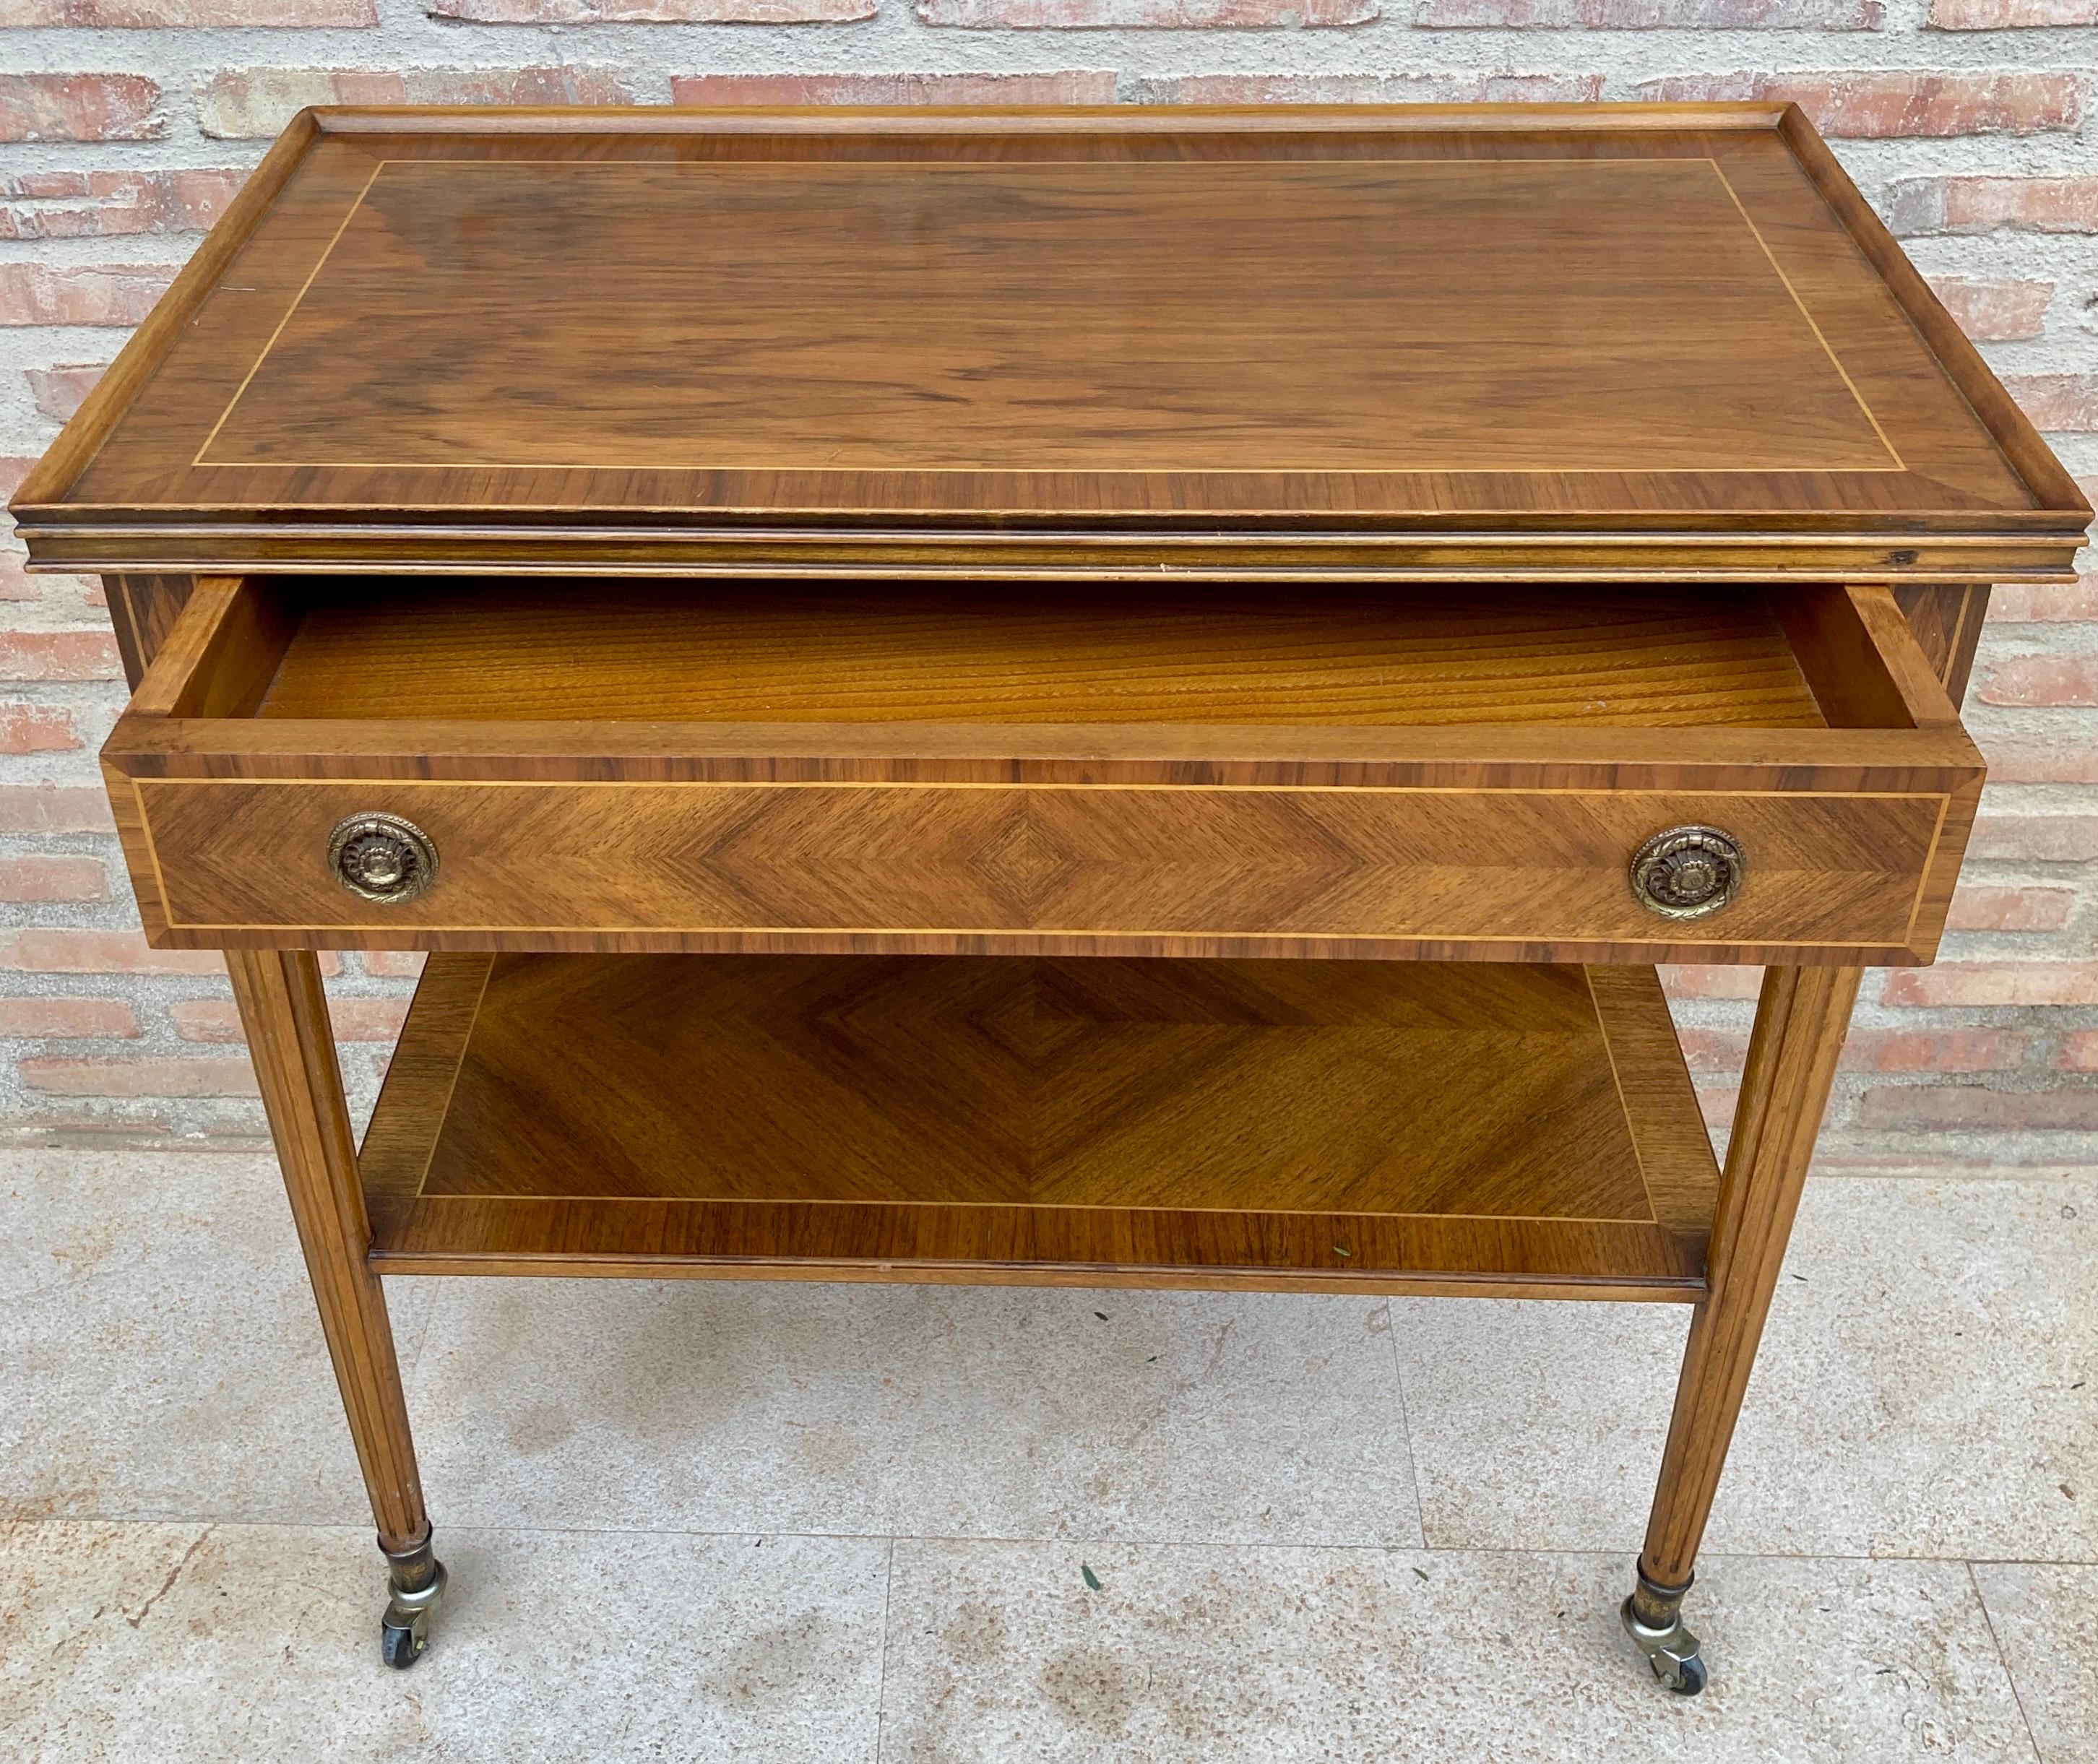 Neoclassic French Marquetry Side Table With One Drawer And Wheels 1940s For Sale 2